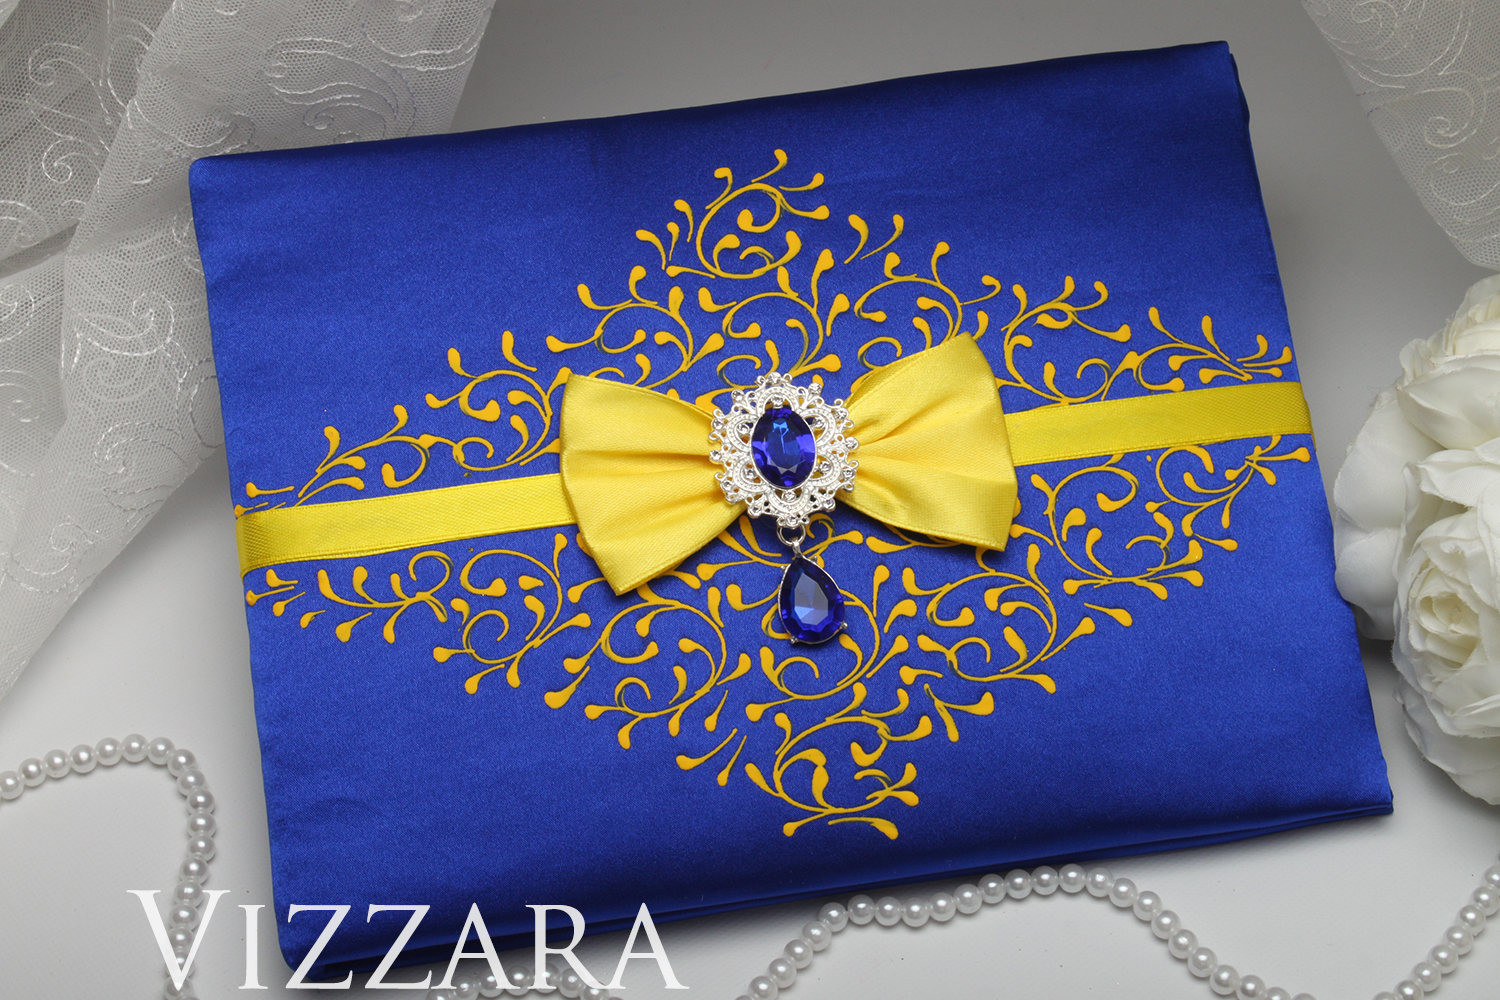 Wedding Guest Book Ideas Etsy
 Guest book Royal blue wedding ideas Personalized guest